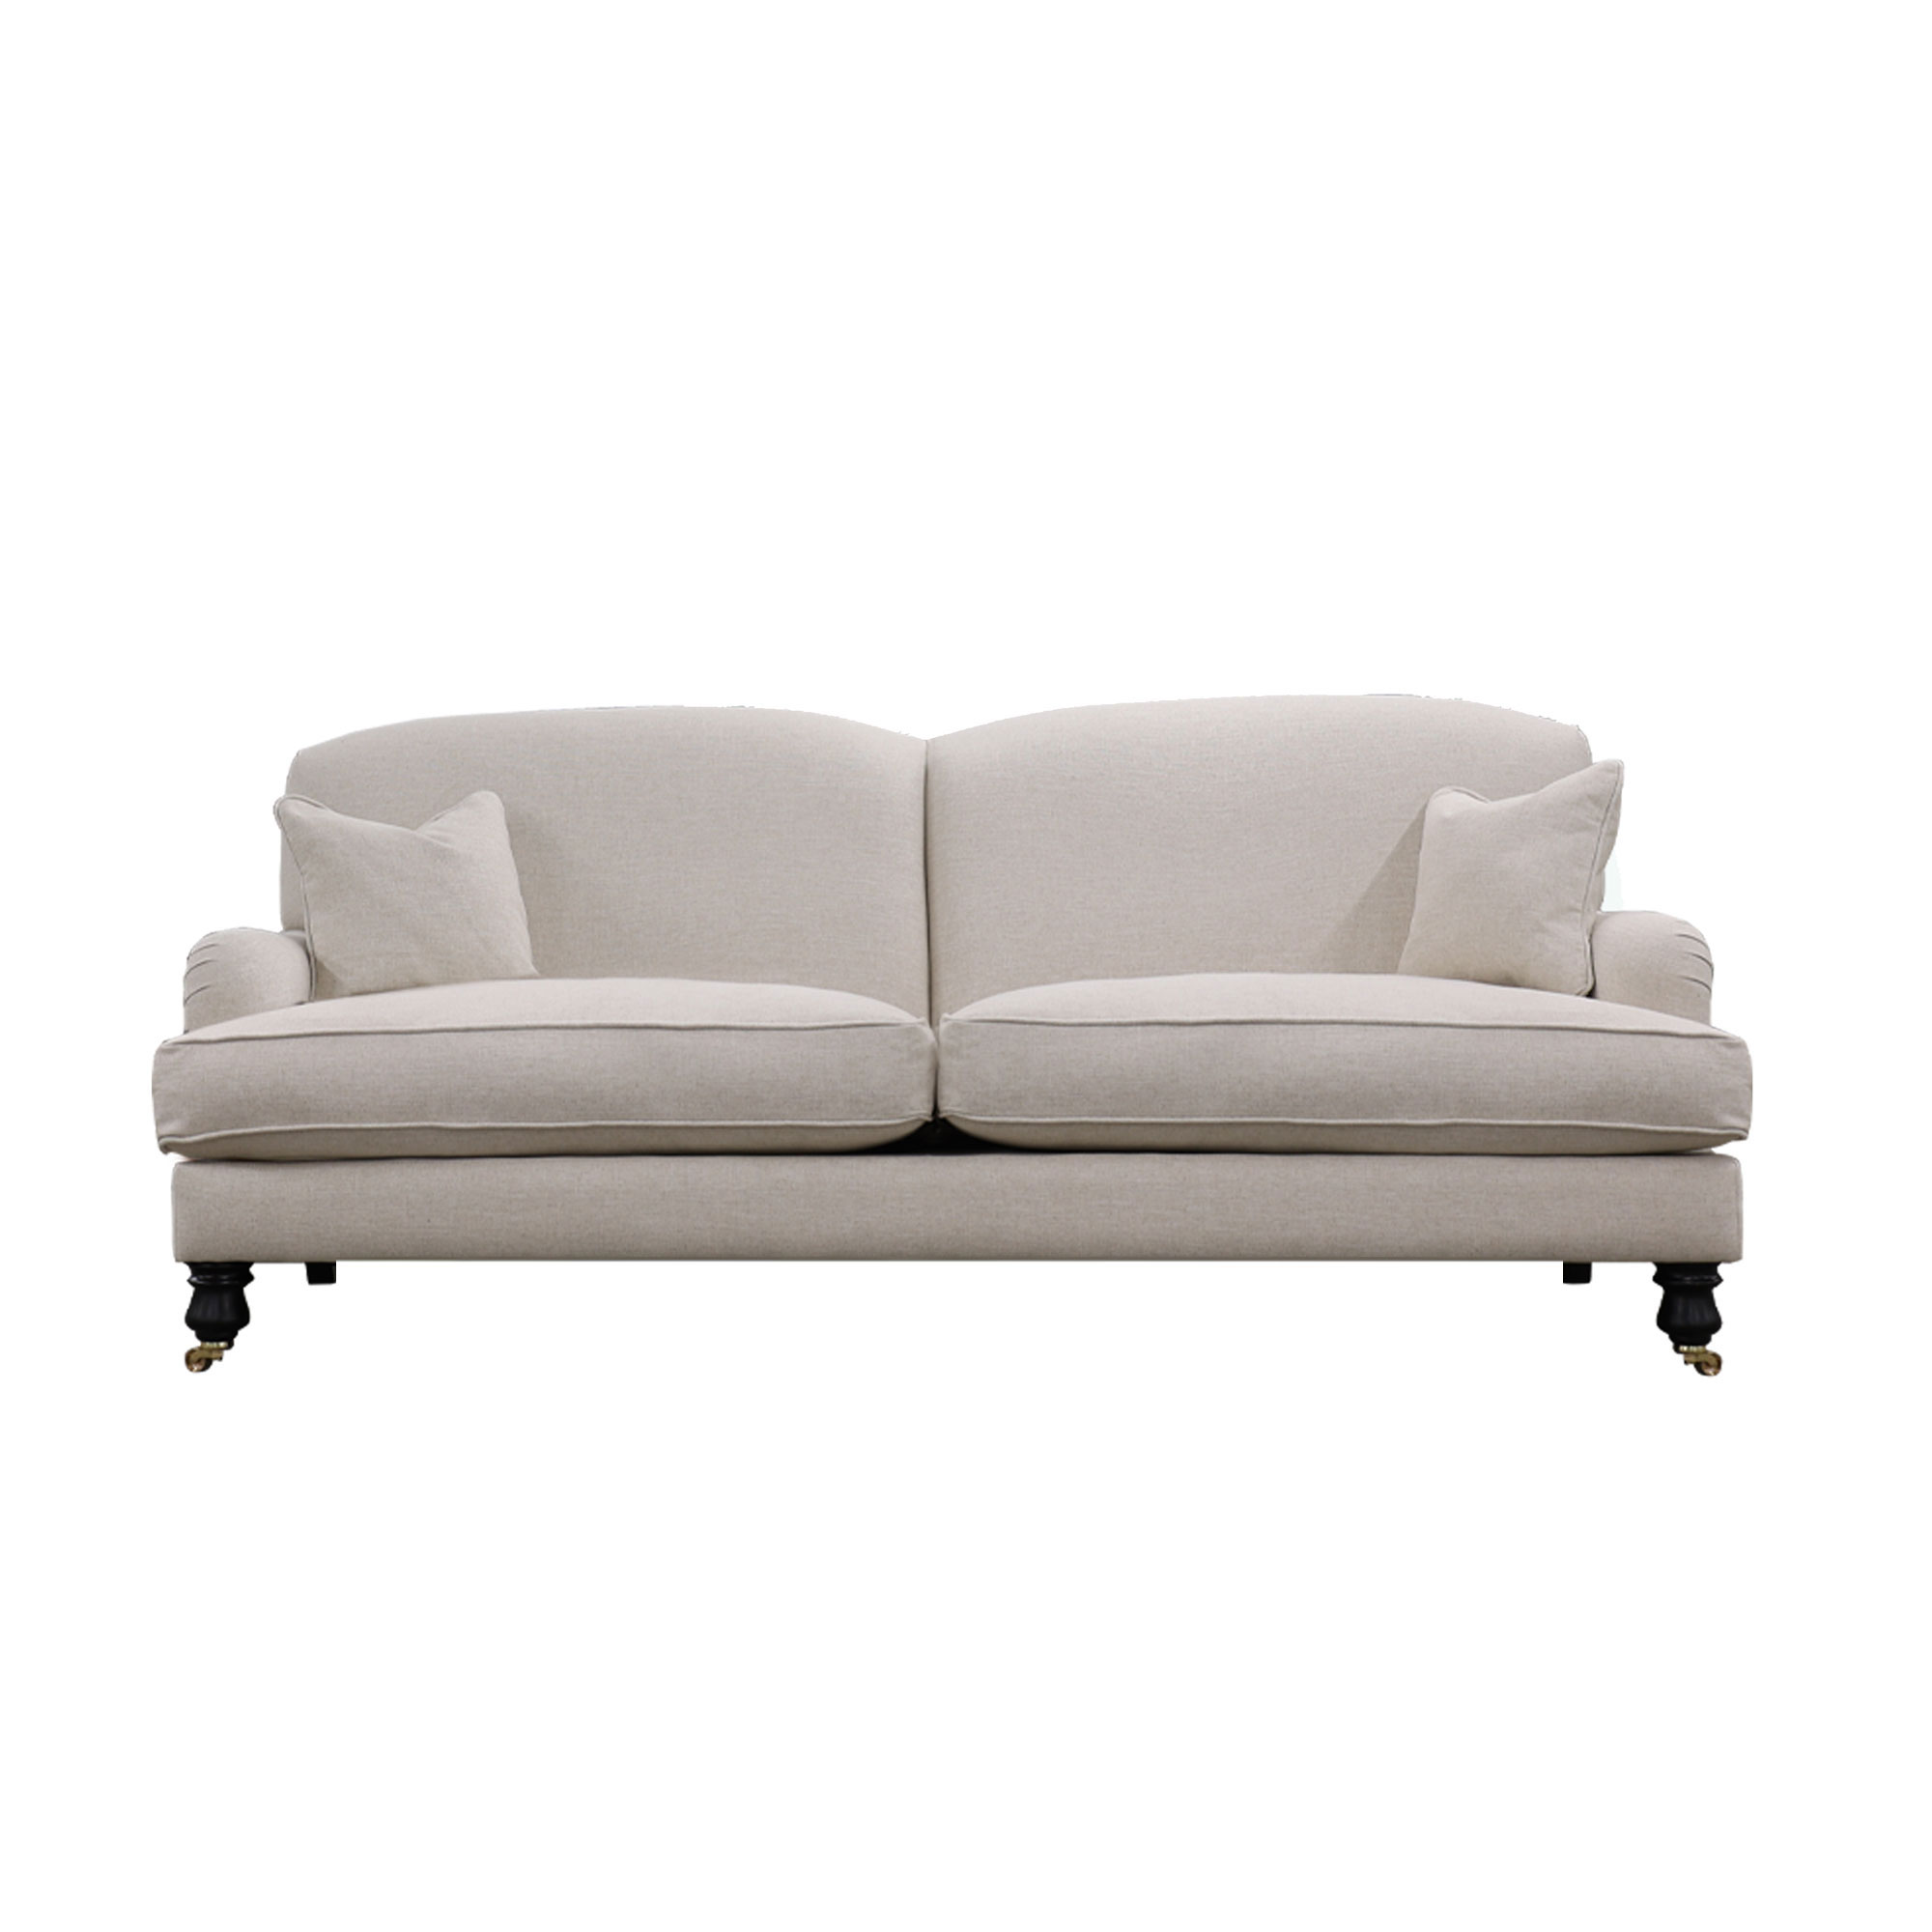 Willow 3 Seater in Antwerp Cream